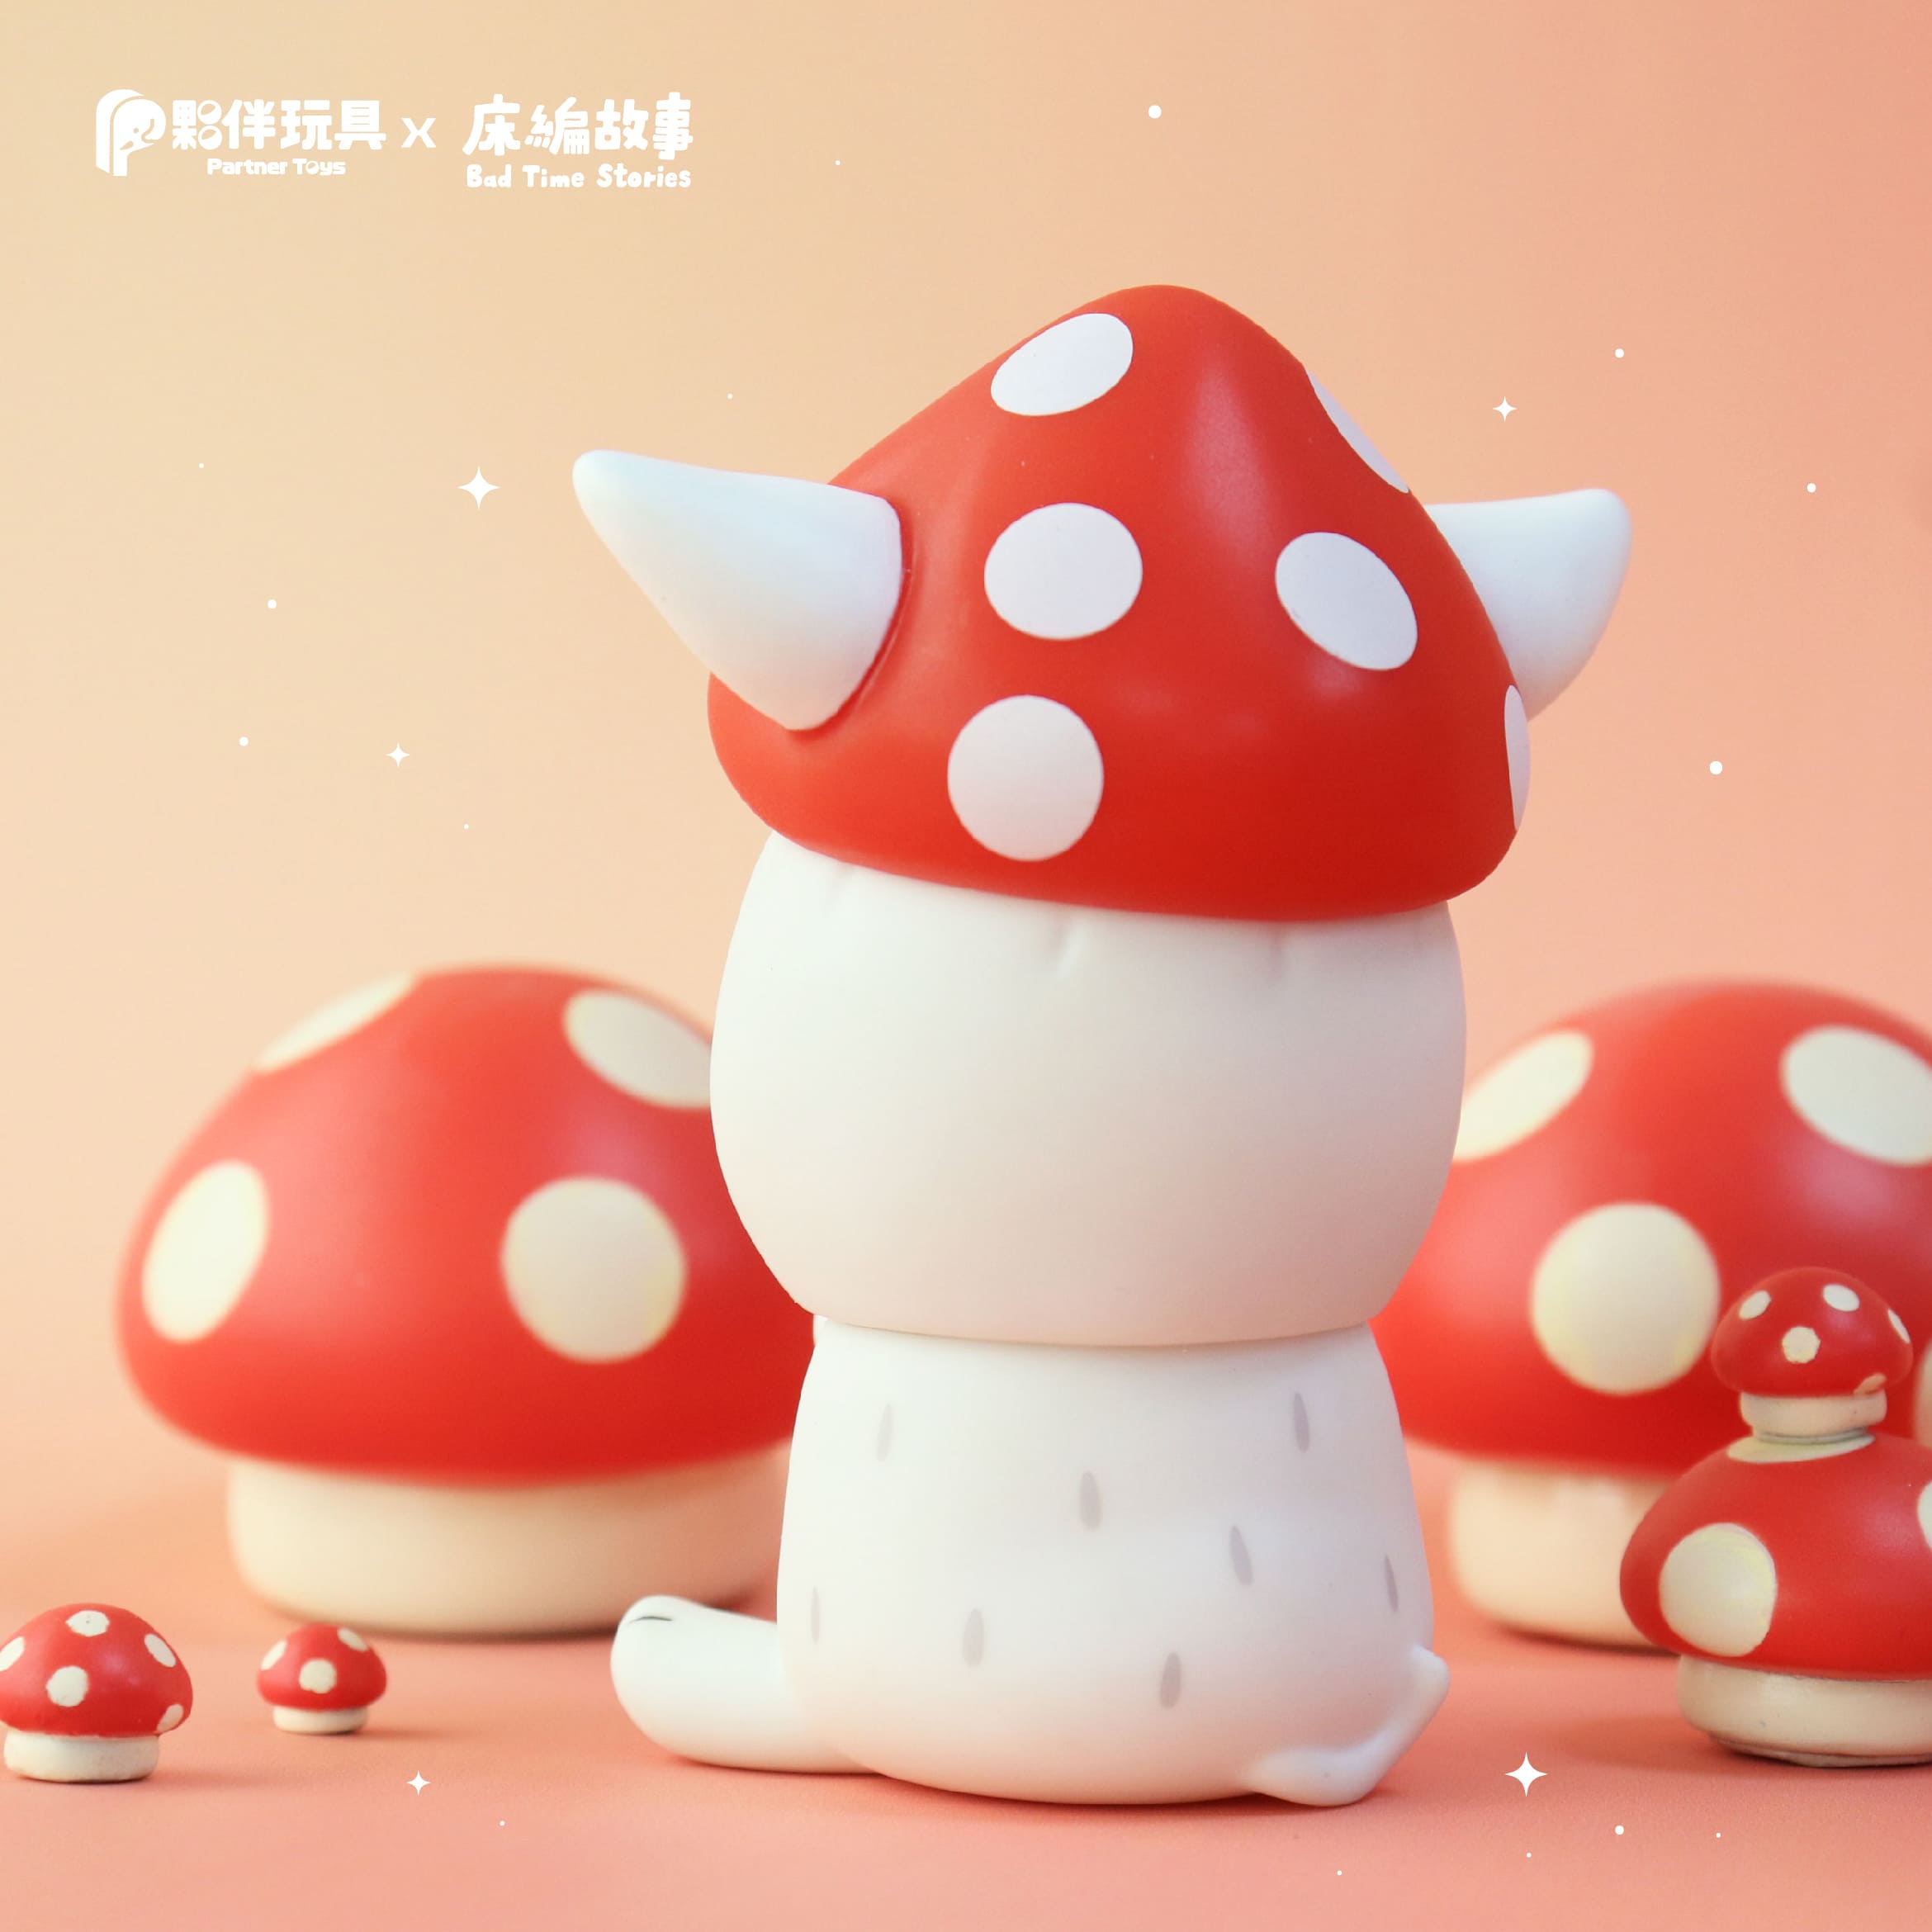 Mushroom dog by Bad Time Stories